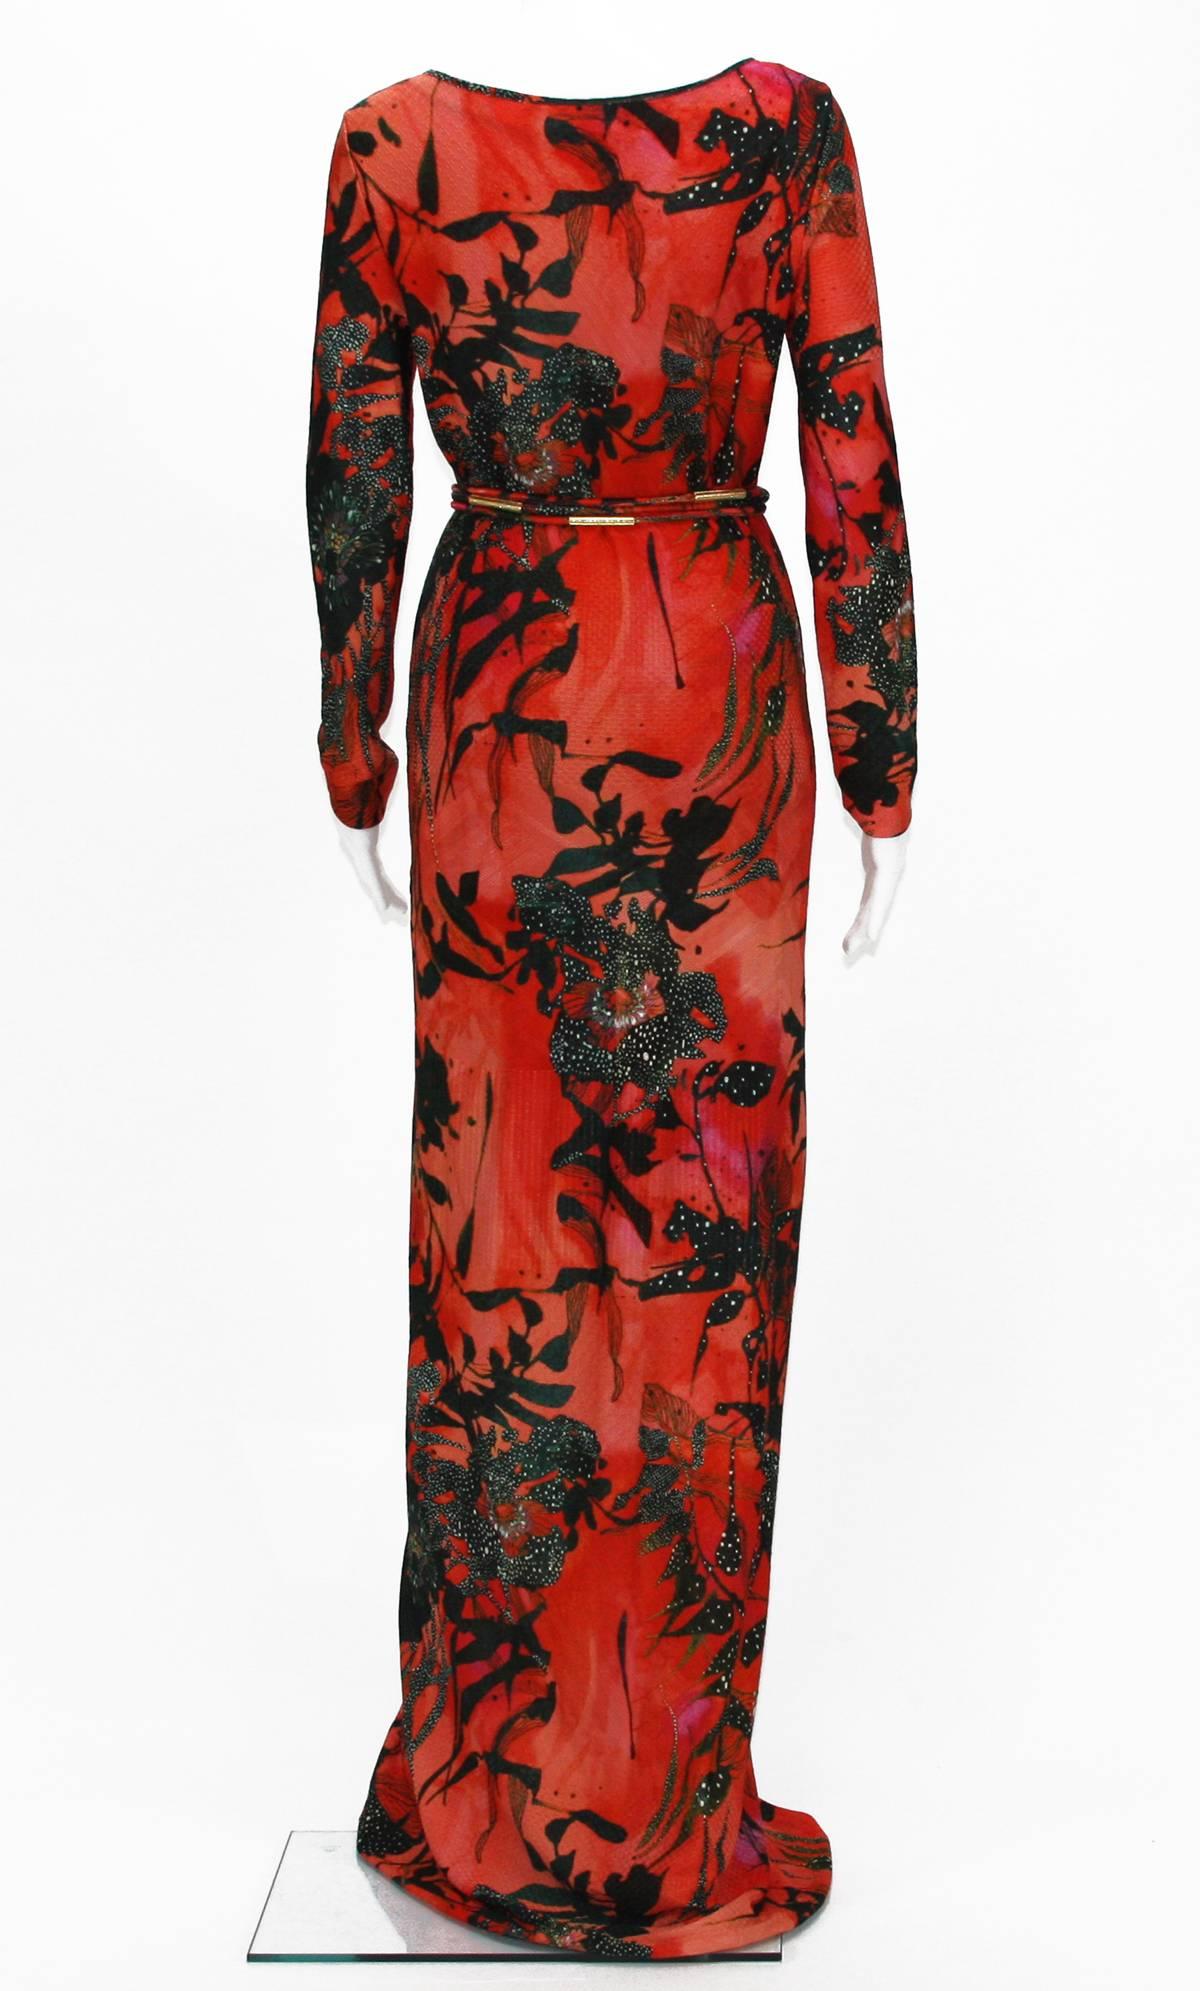 Women's New ETRO Jersey Red Black Floral Print Long Dress with Belt IT.42 - US 6